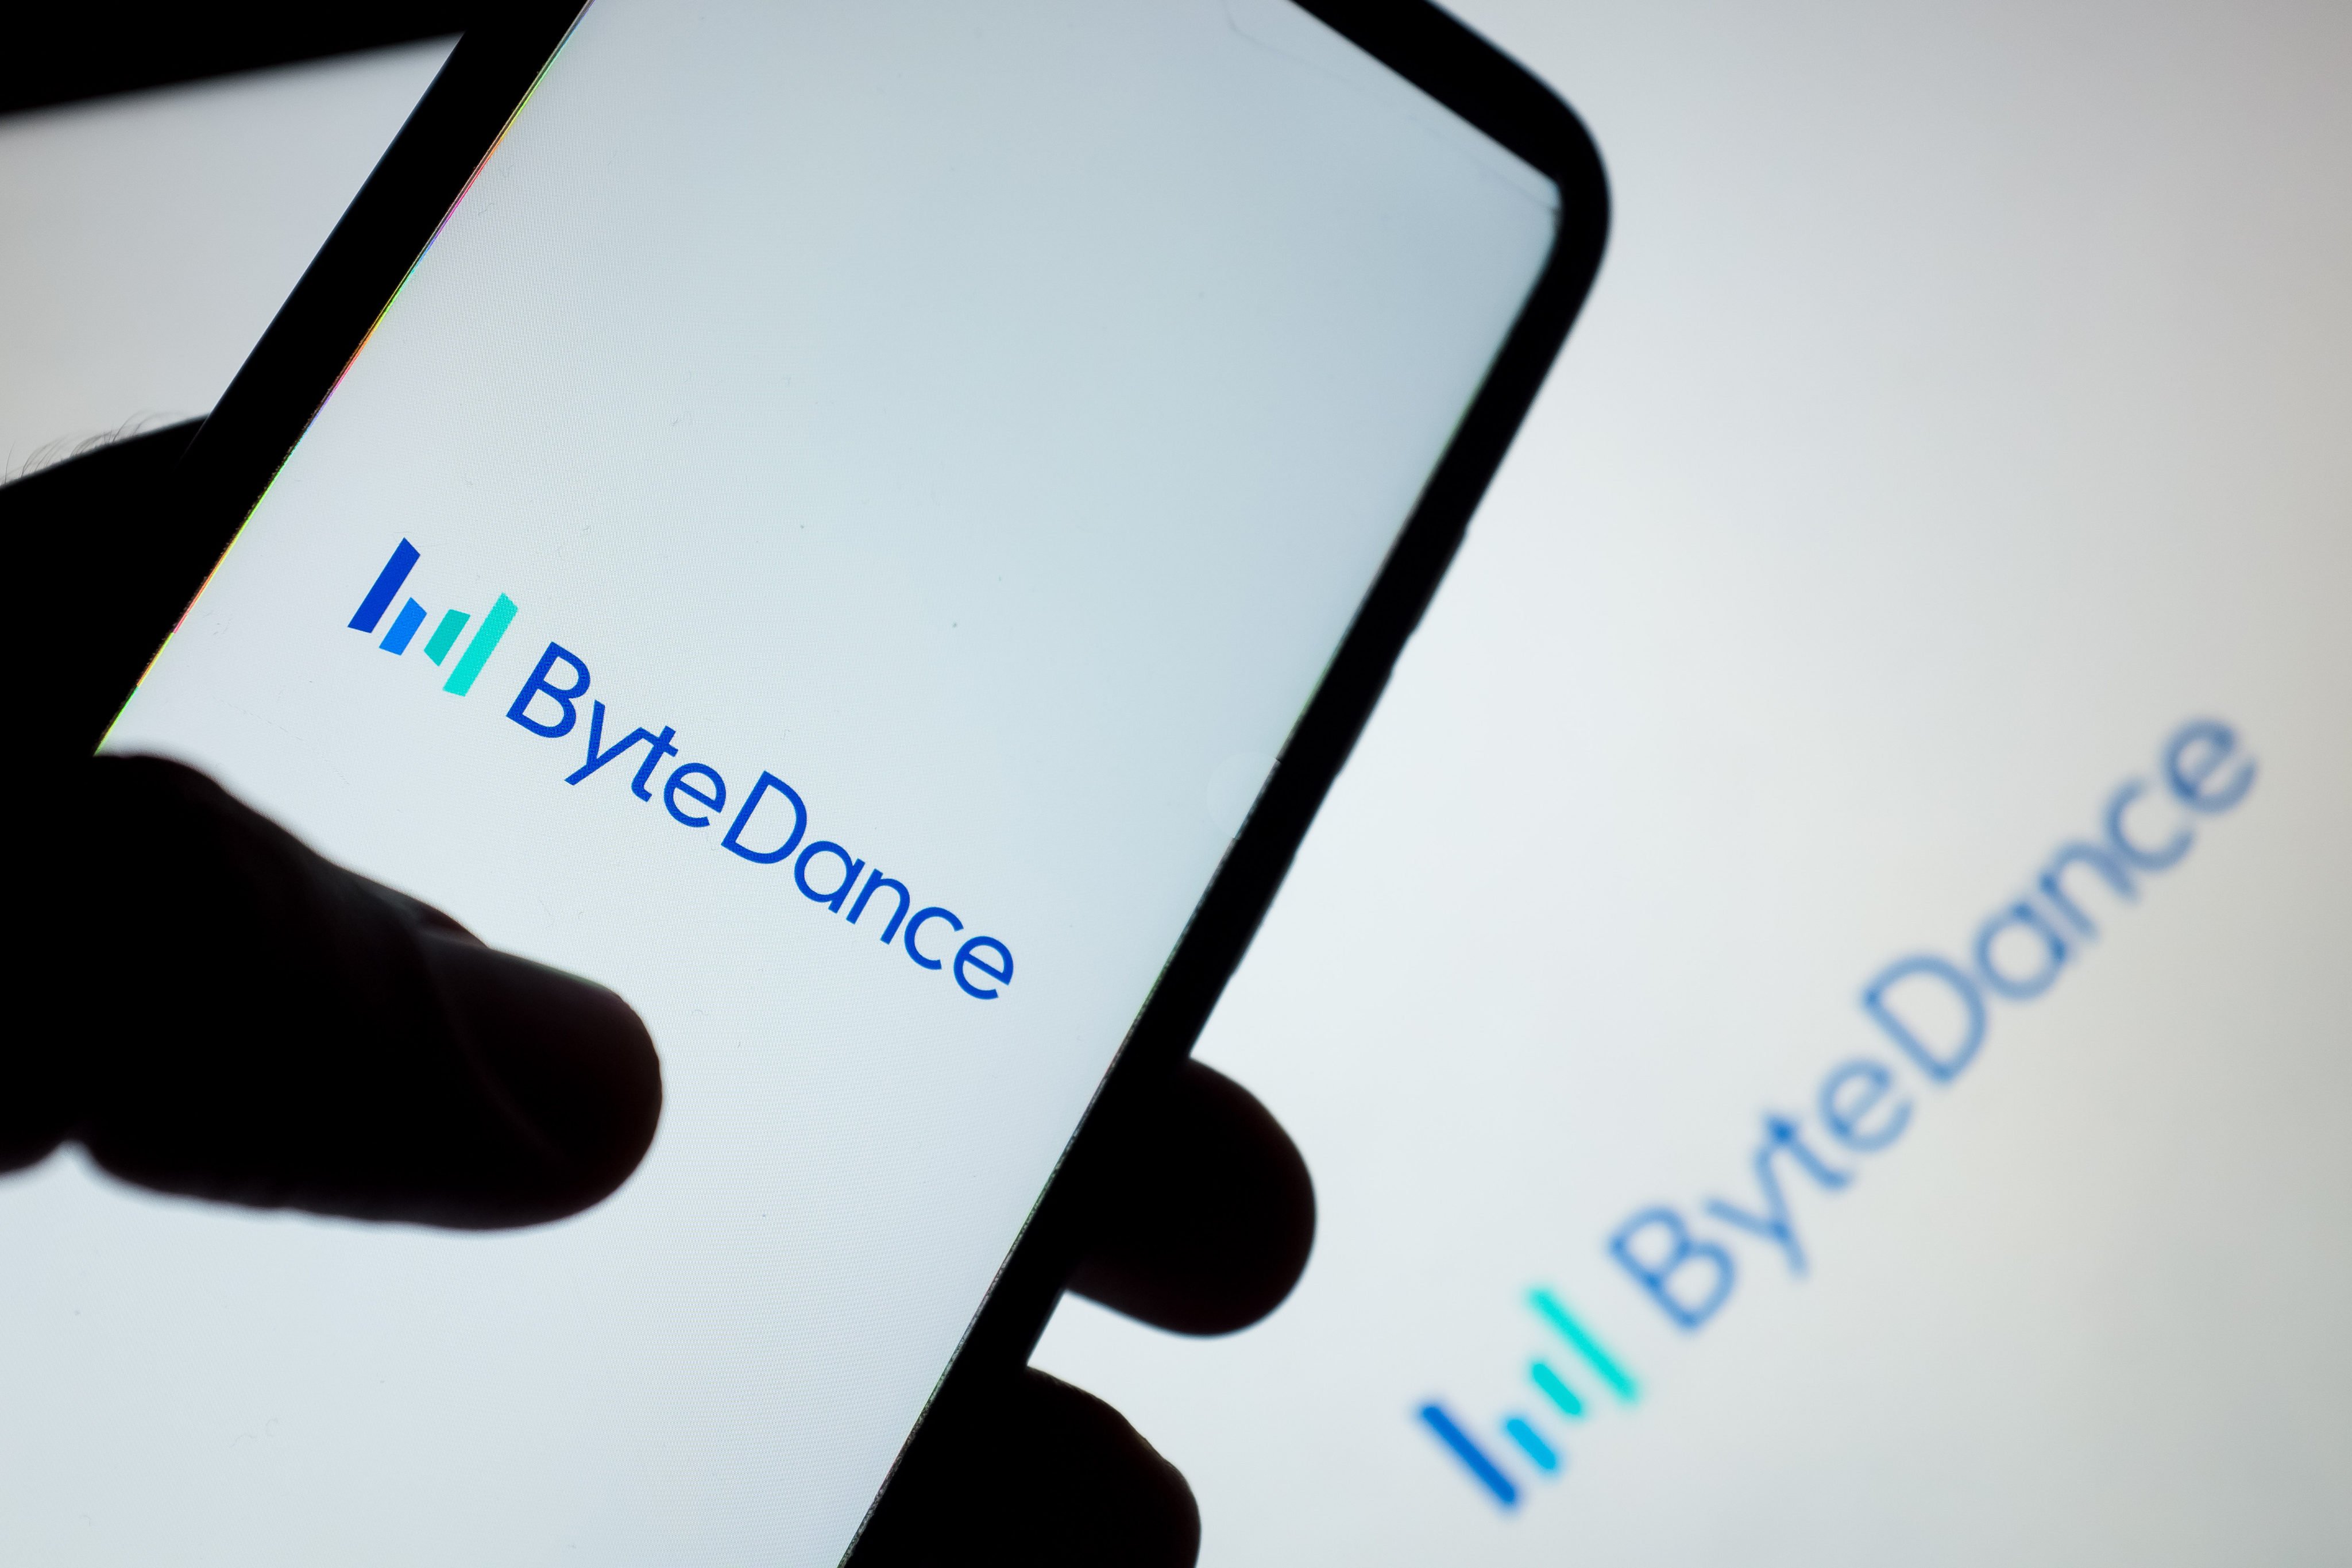 ByteDance was forced to cut its workforce and sell assets in a significant retreat from the video gaming industry amid economic headwinds and regulatory pressures. Photo: NurPhoto via Getty Images